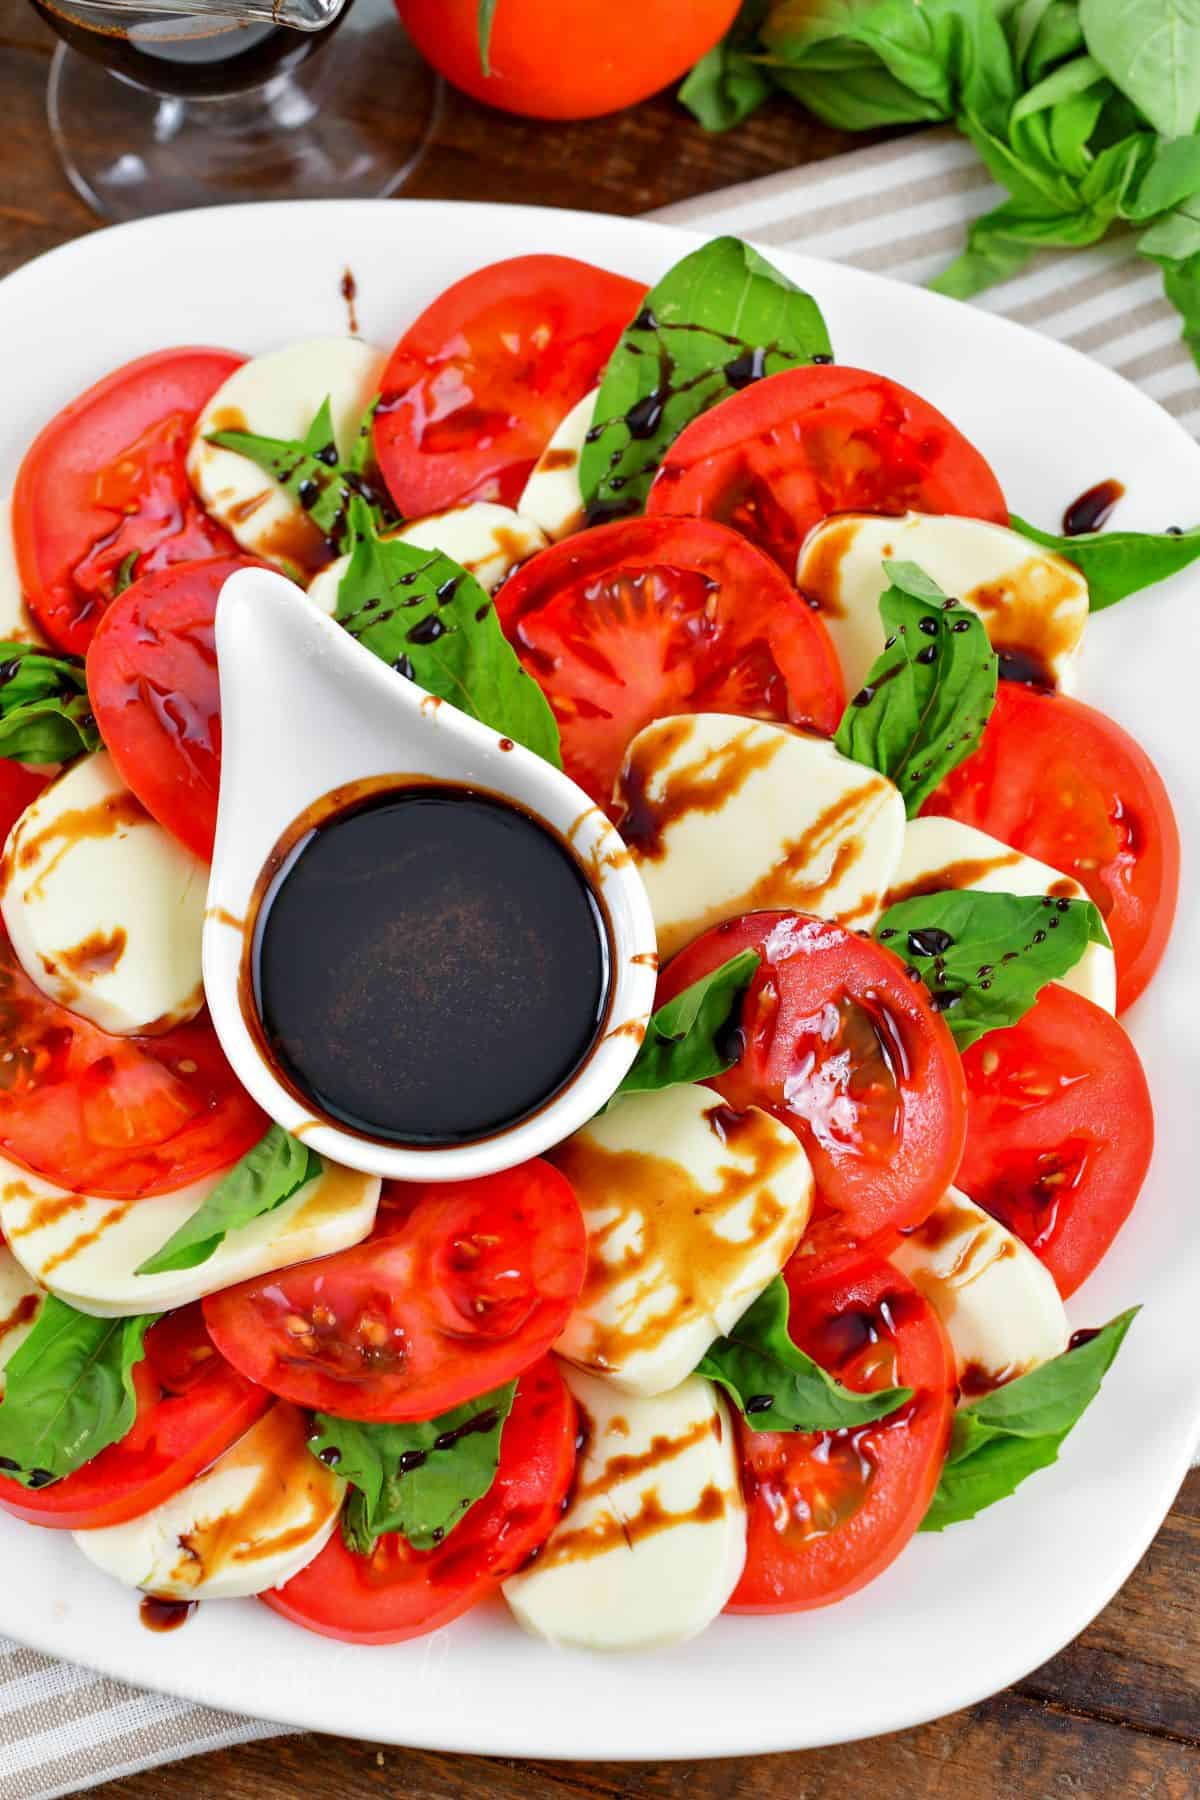 layered tomatoes and mozzarella cheese slices with basil leaves and balsamic reduction.